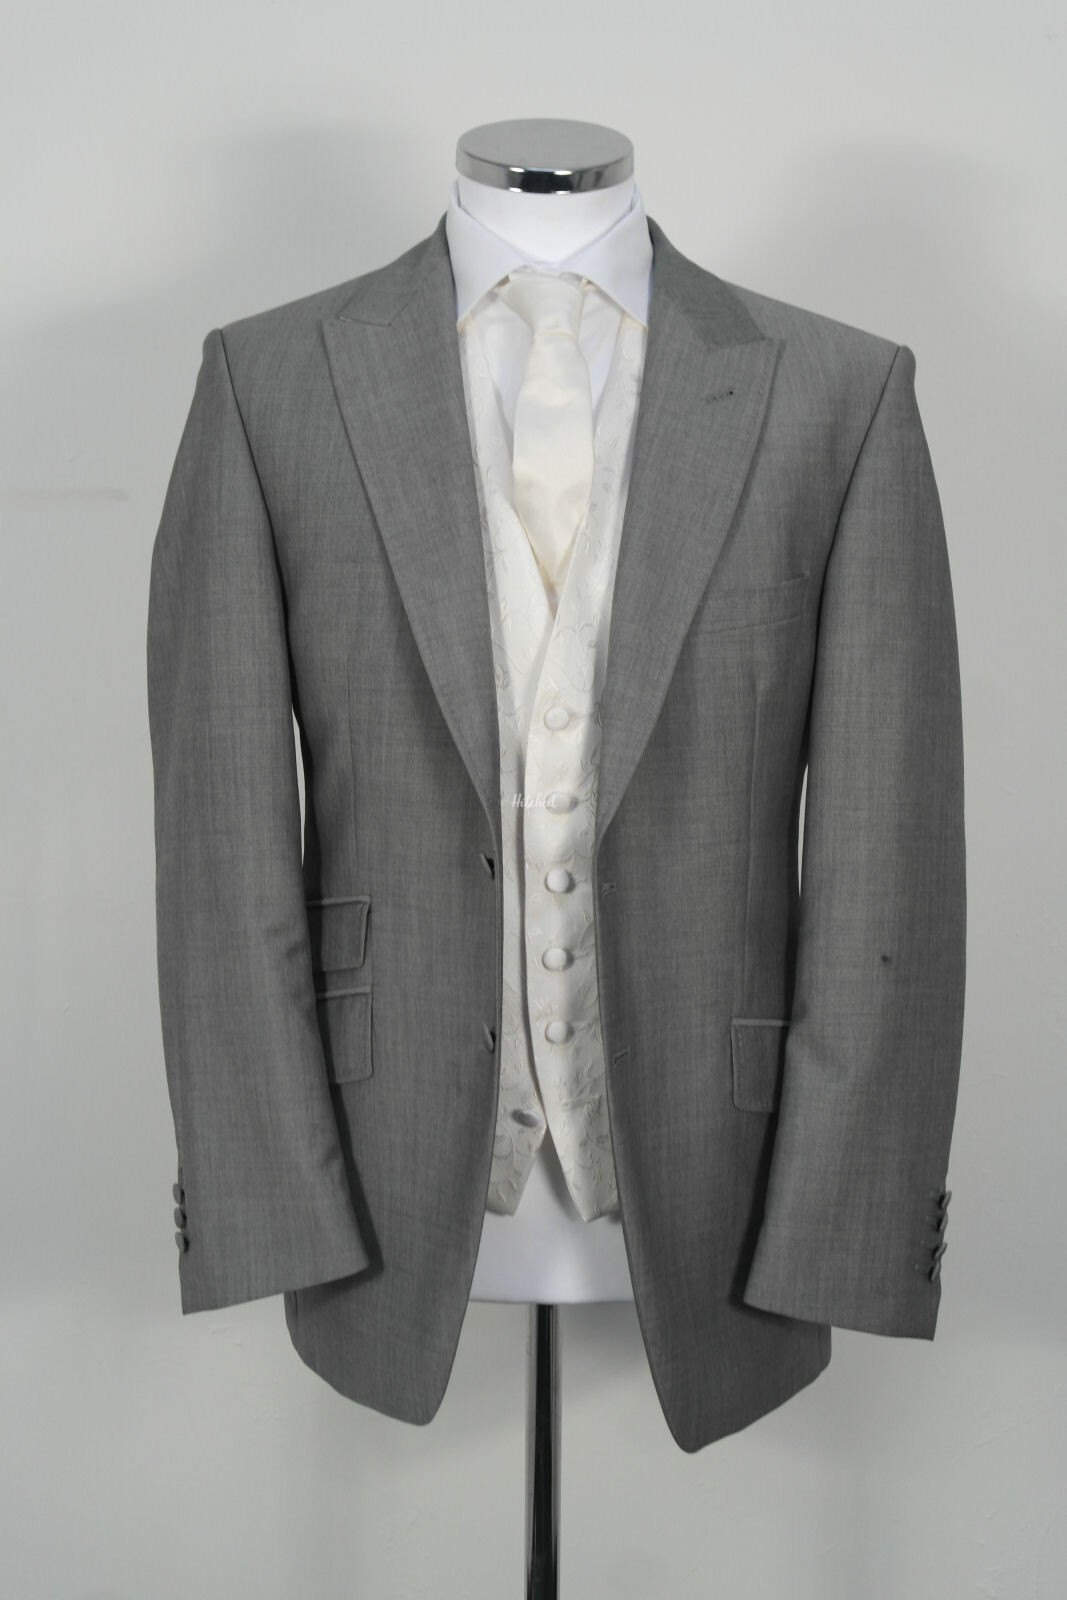 13 Mens Wedding Suit from STEPHEN BISHOP - hitched.co.uk